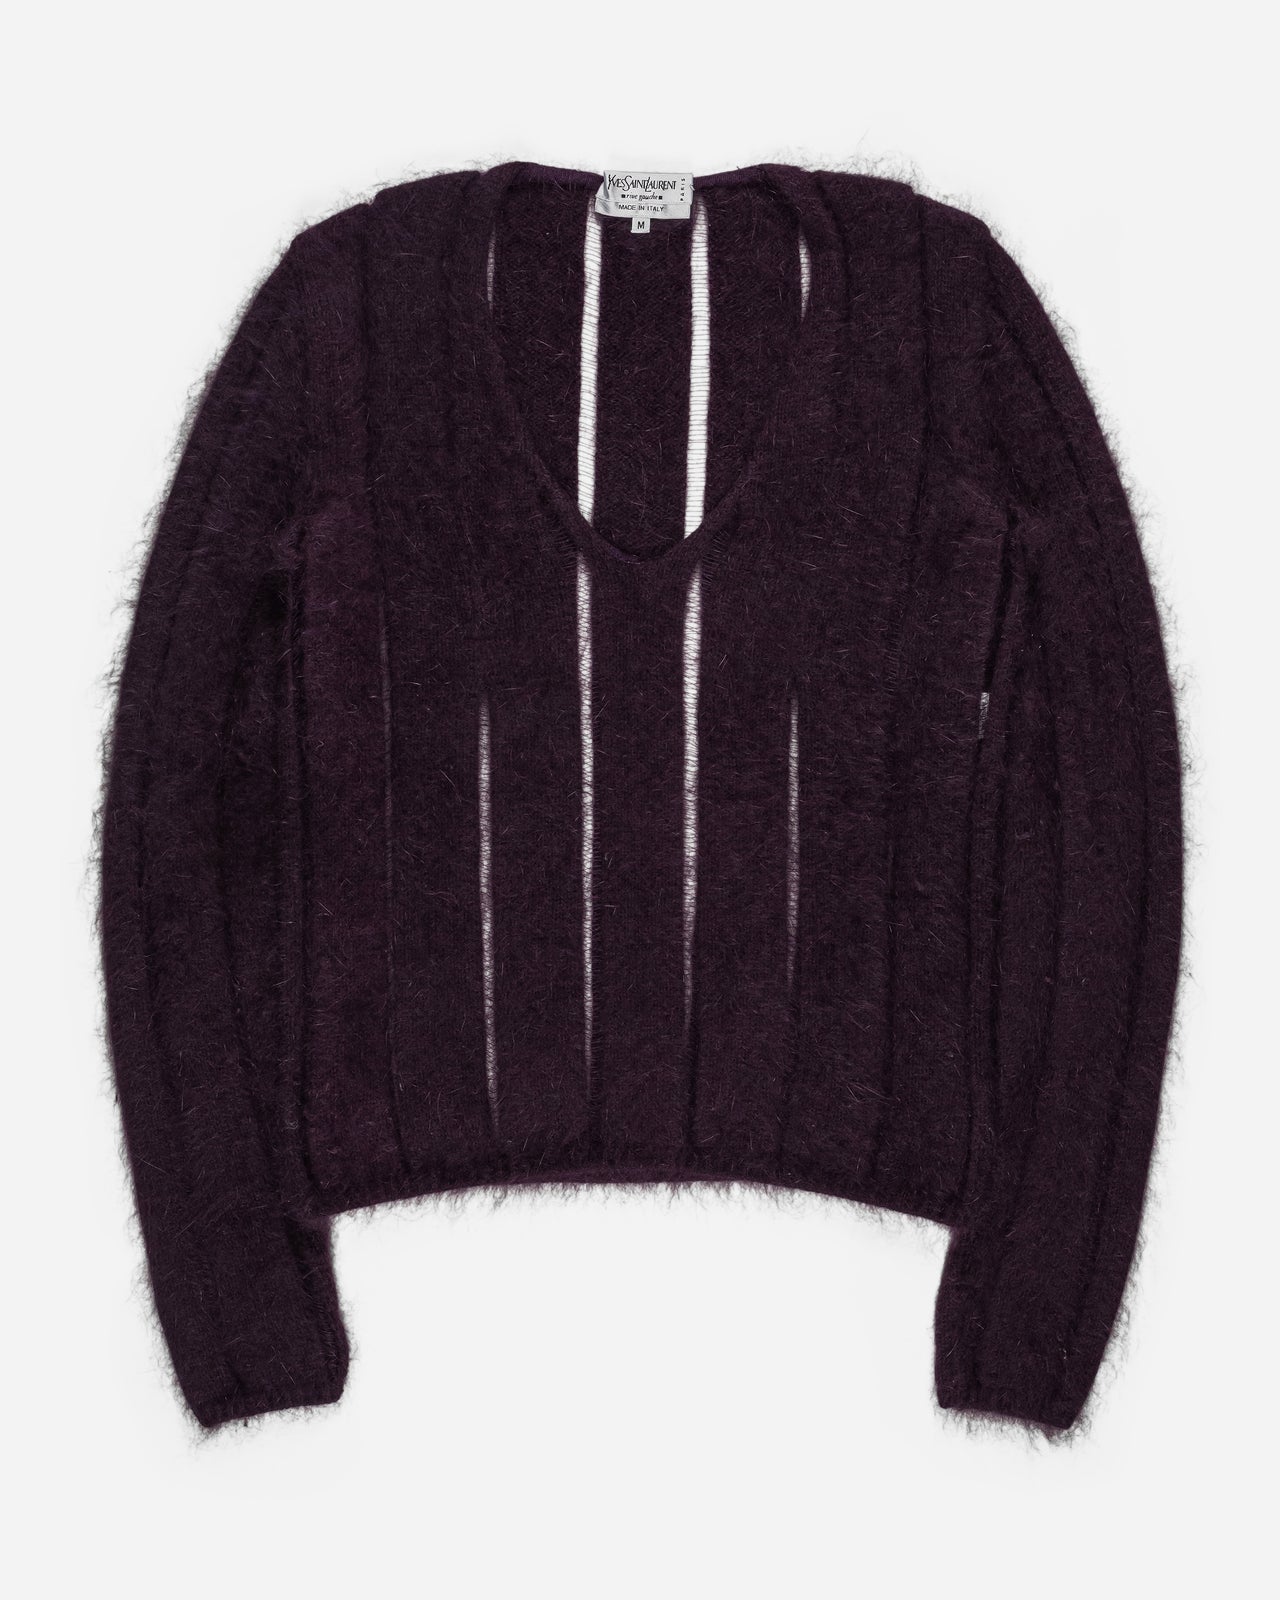 Yves Saint Laurent Rive Gauche by Tom Ford Plum Angora Drop-Stitch Knit Sweater - AW01